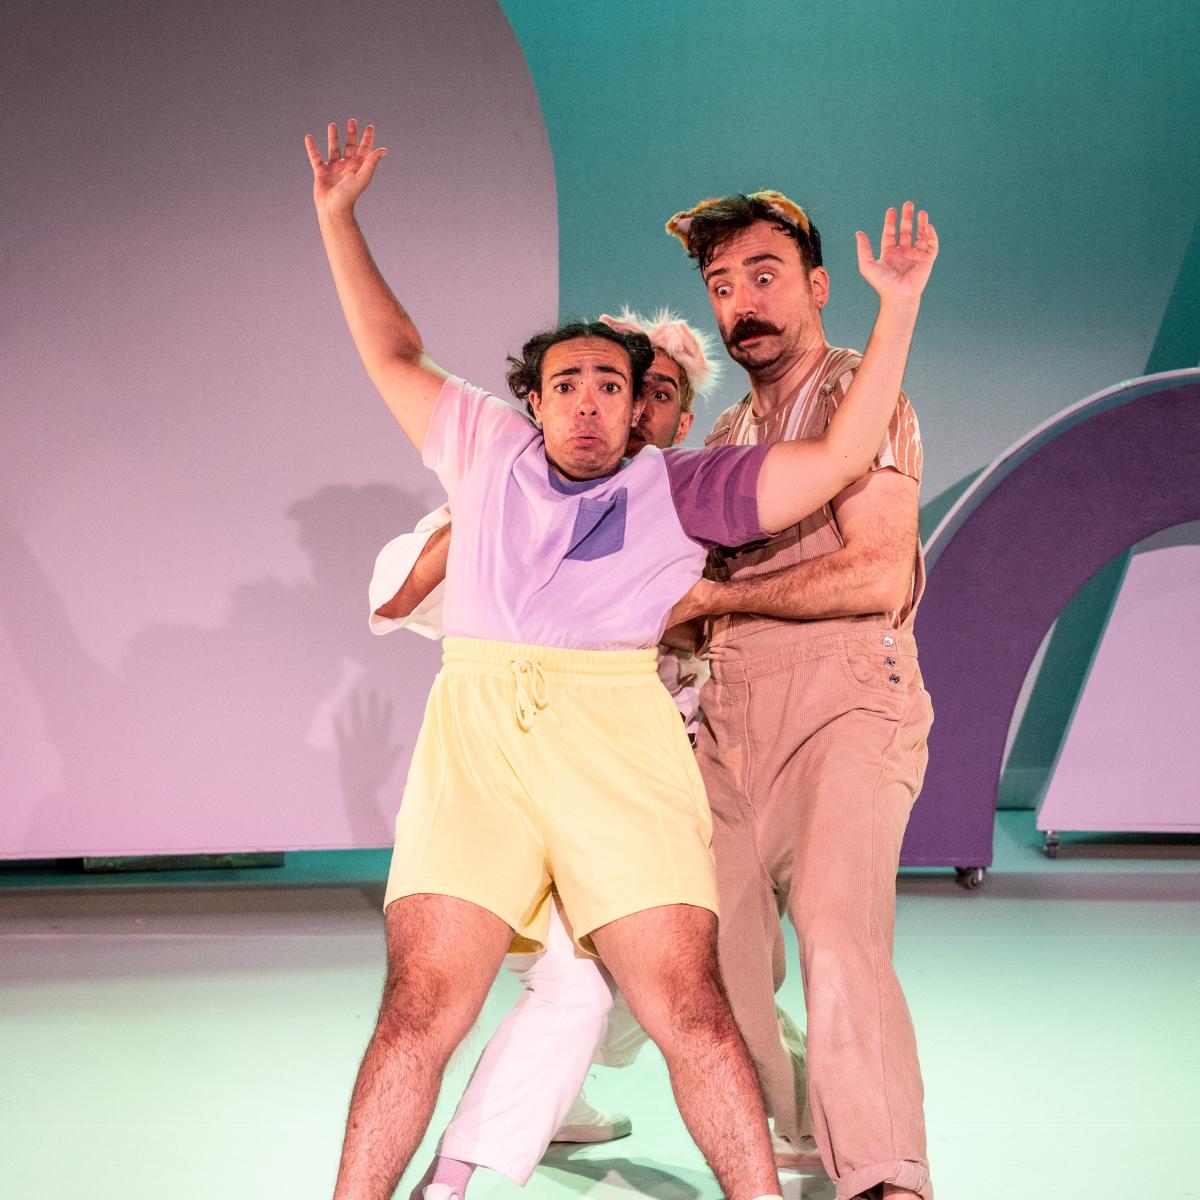 Production image of Milk Presents' Marty and the Party 